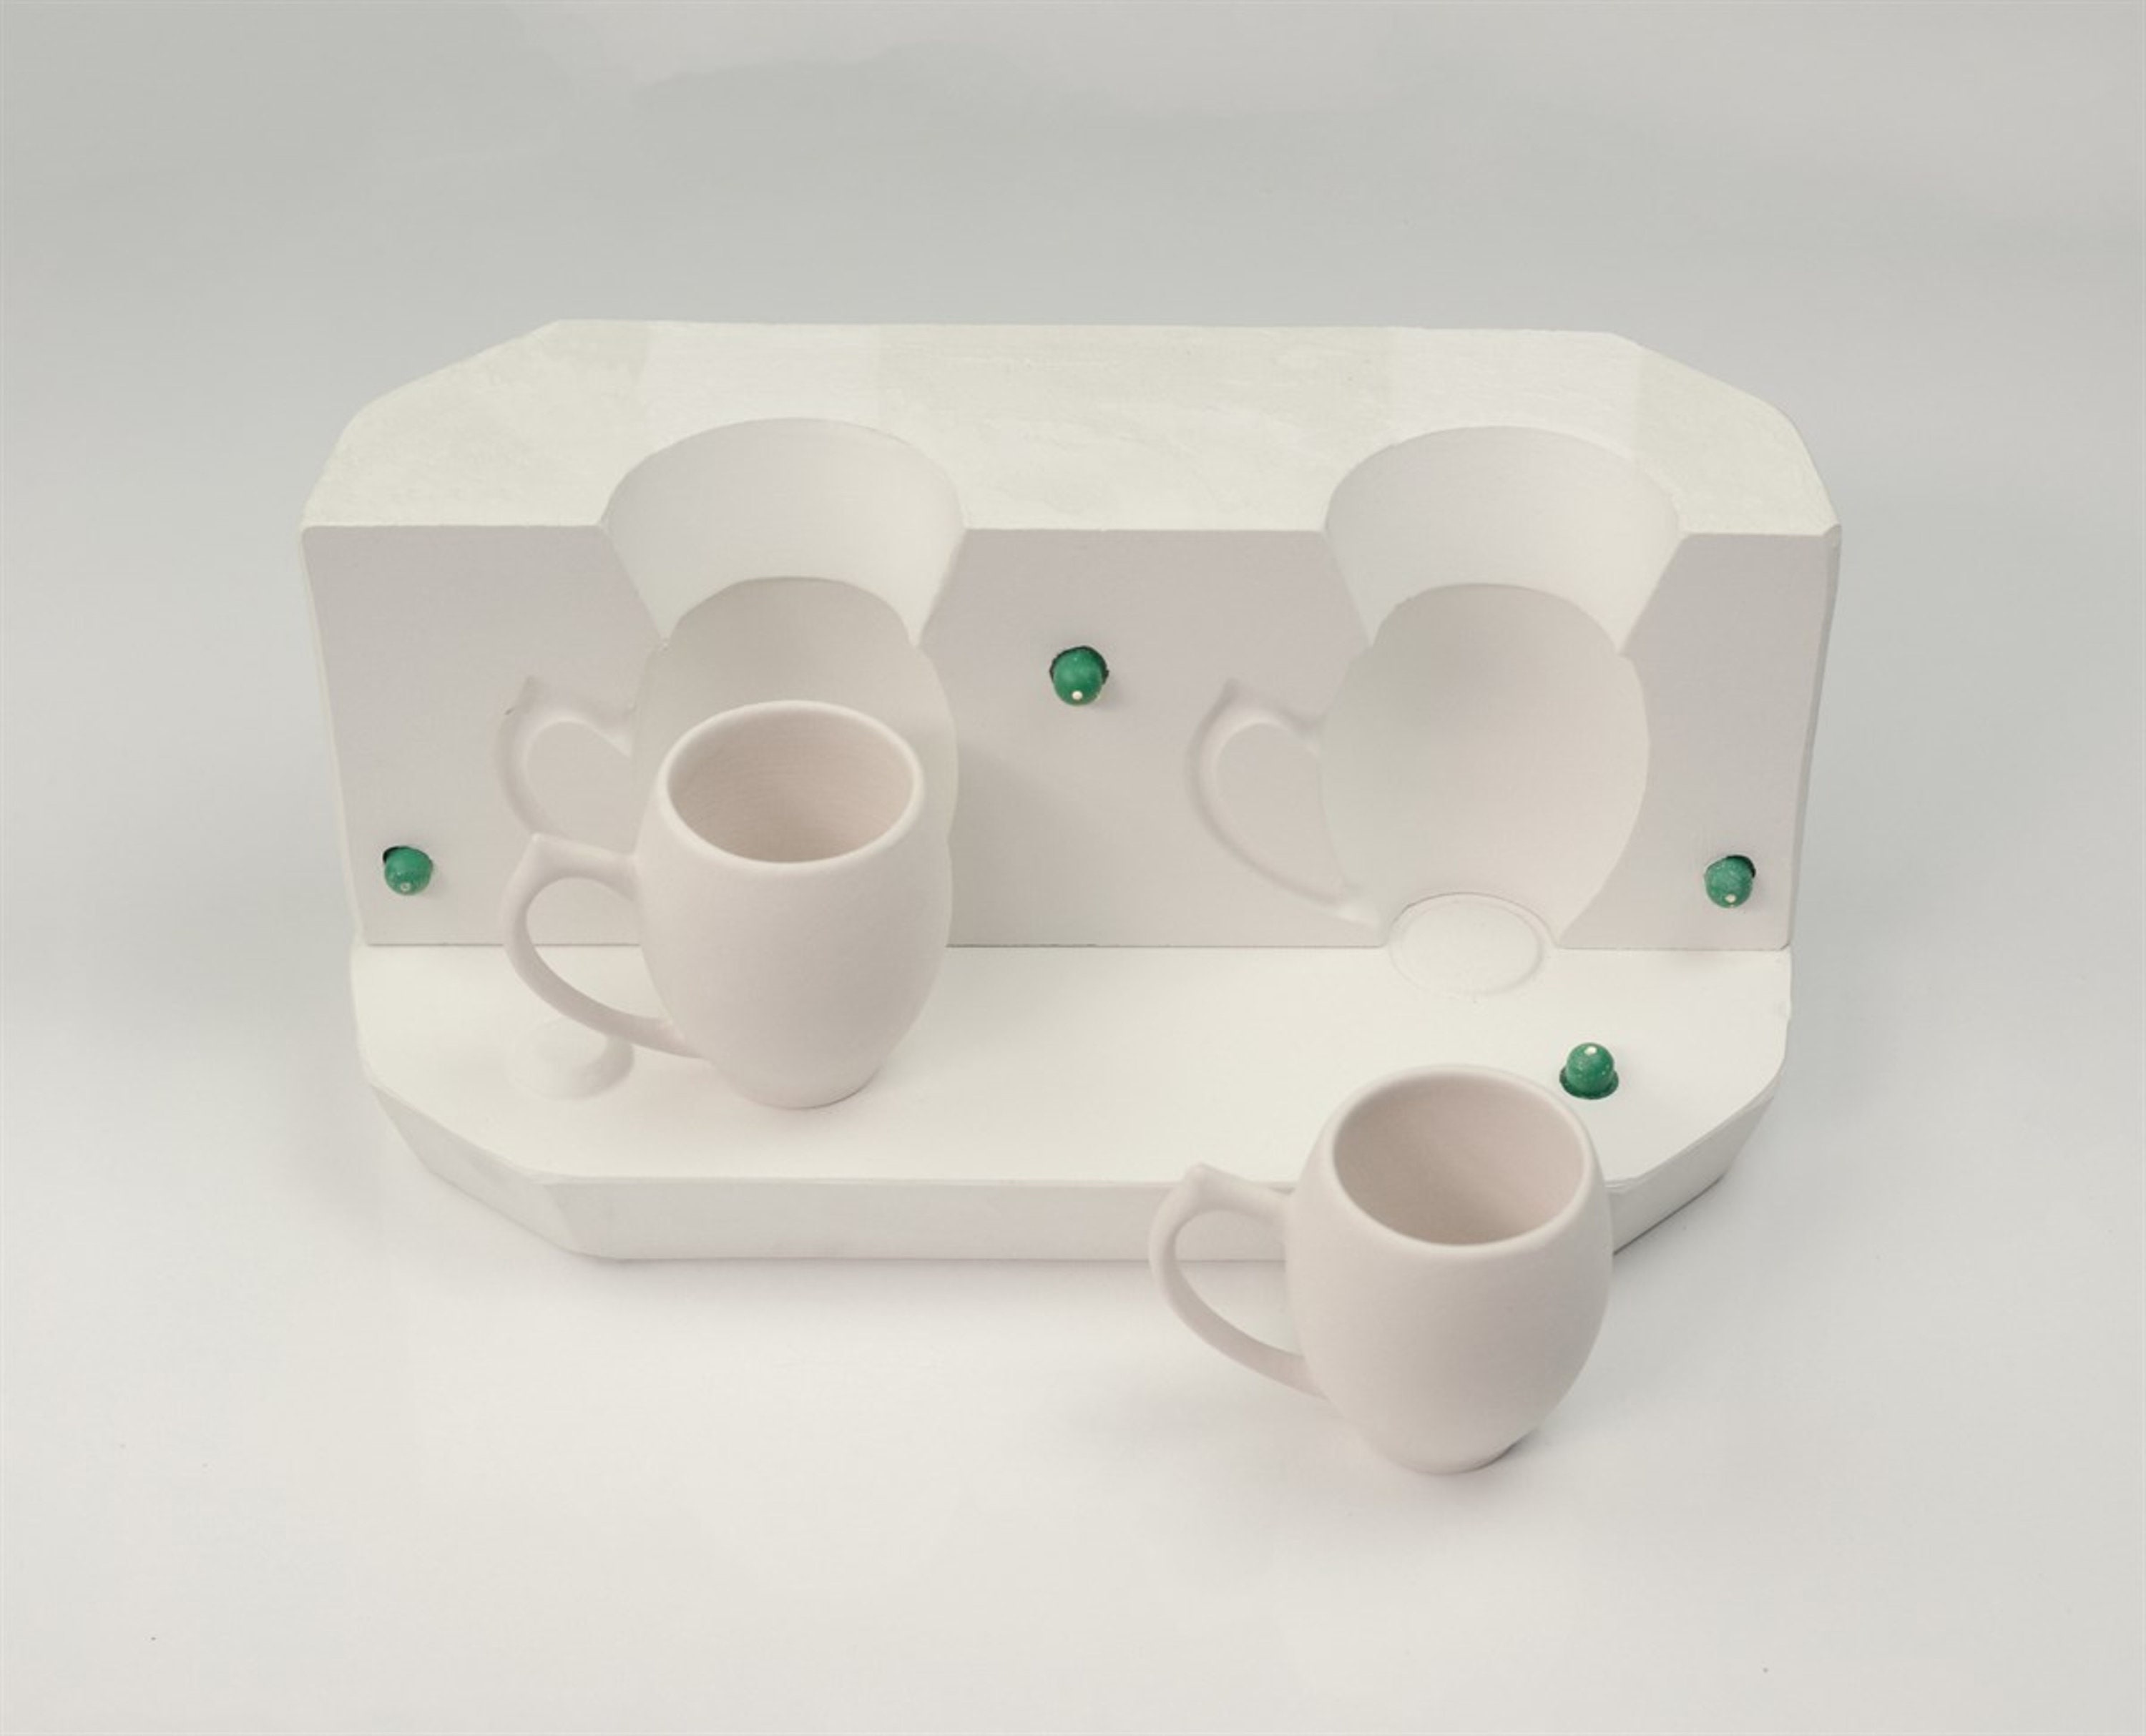 Casting Molds for Ceramic Mugs and Cups, Plaster Moulds for